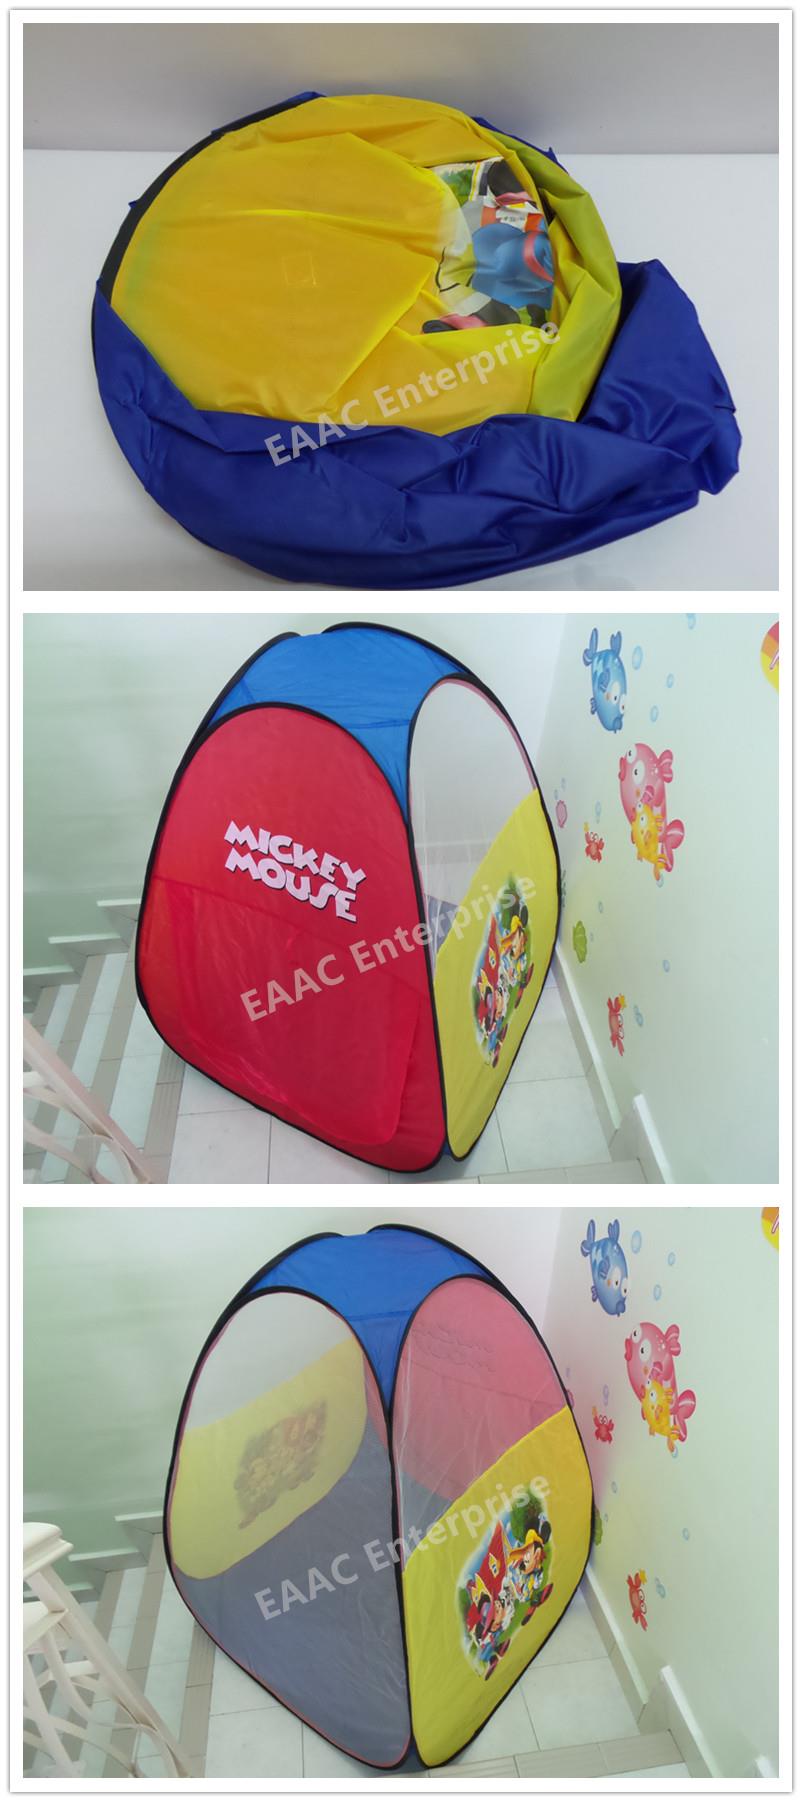 Mickey Mouse Fold-able Tent 106 x 106 x 103cm with 100 balls